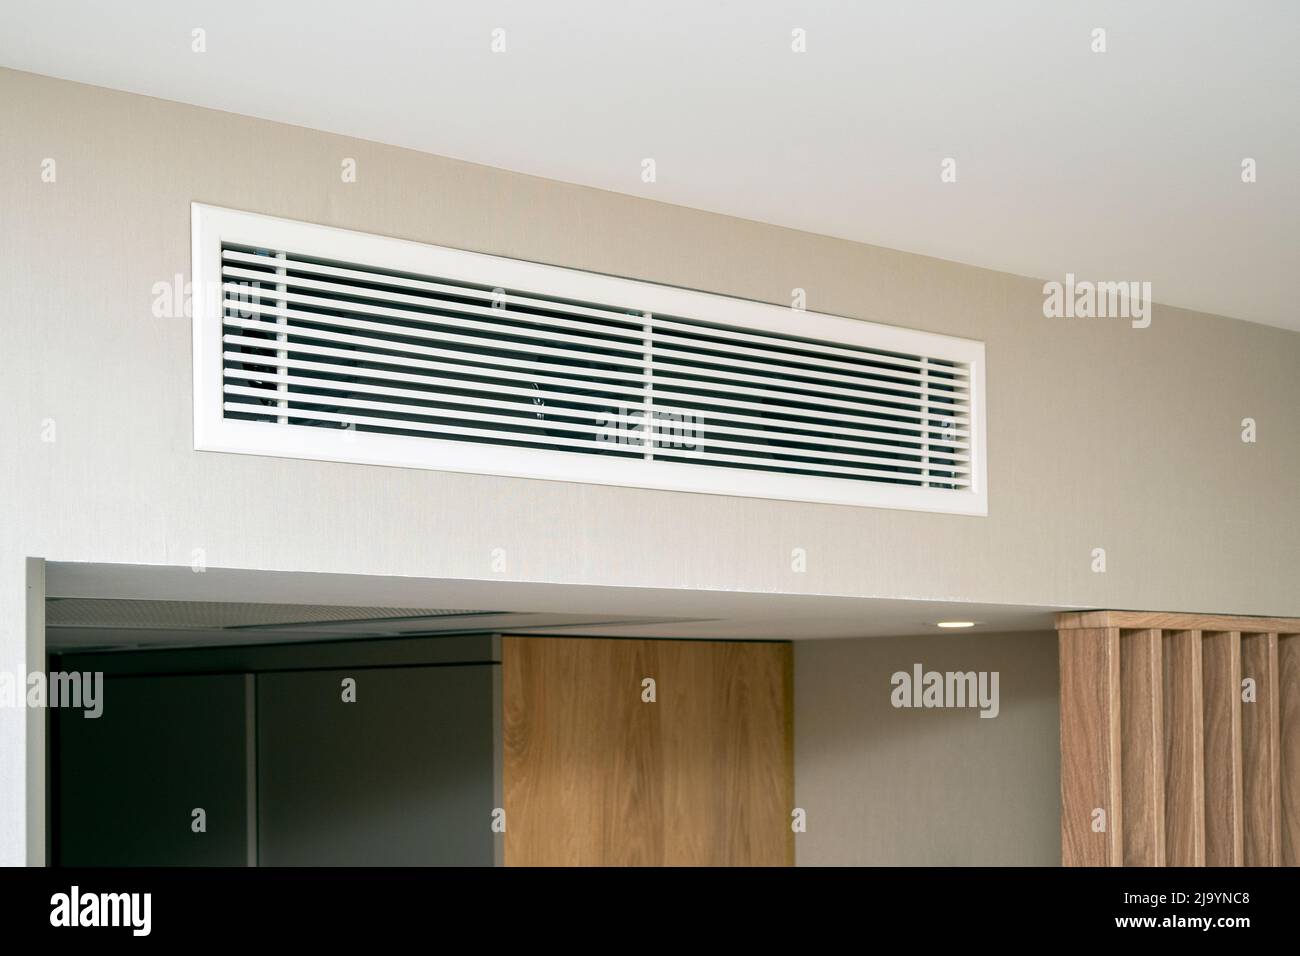 Clean modern air condition, air conditioner system at a room in hotel Stock Photo